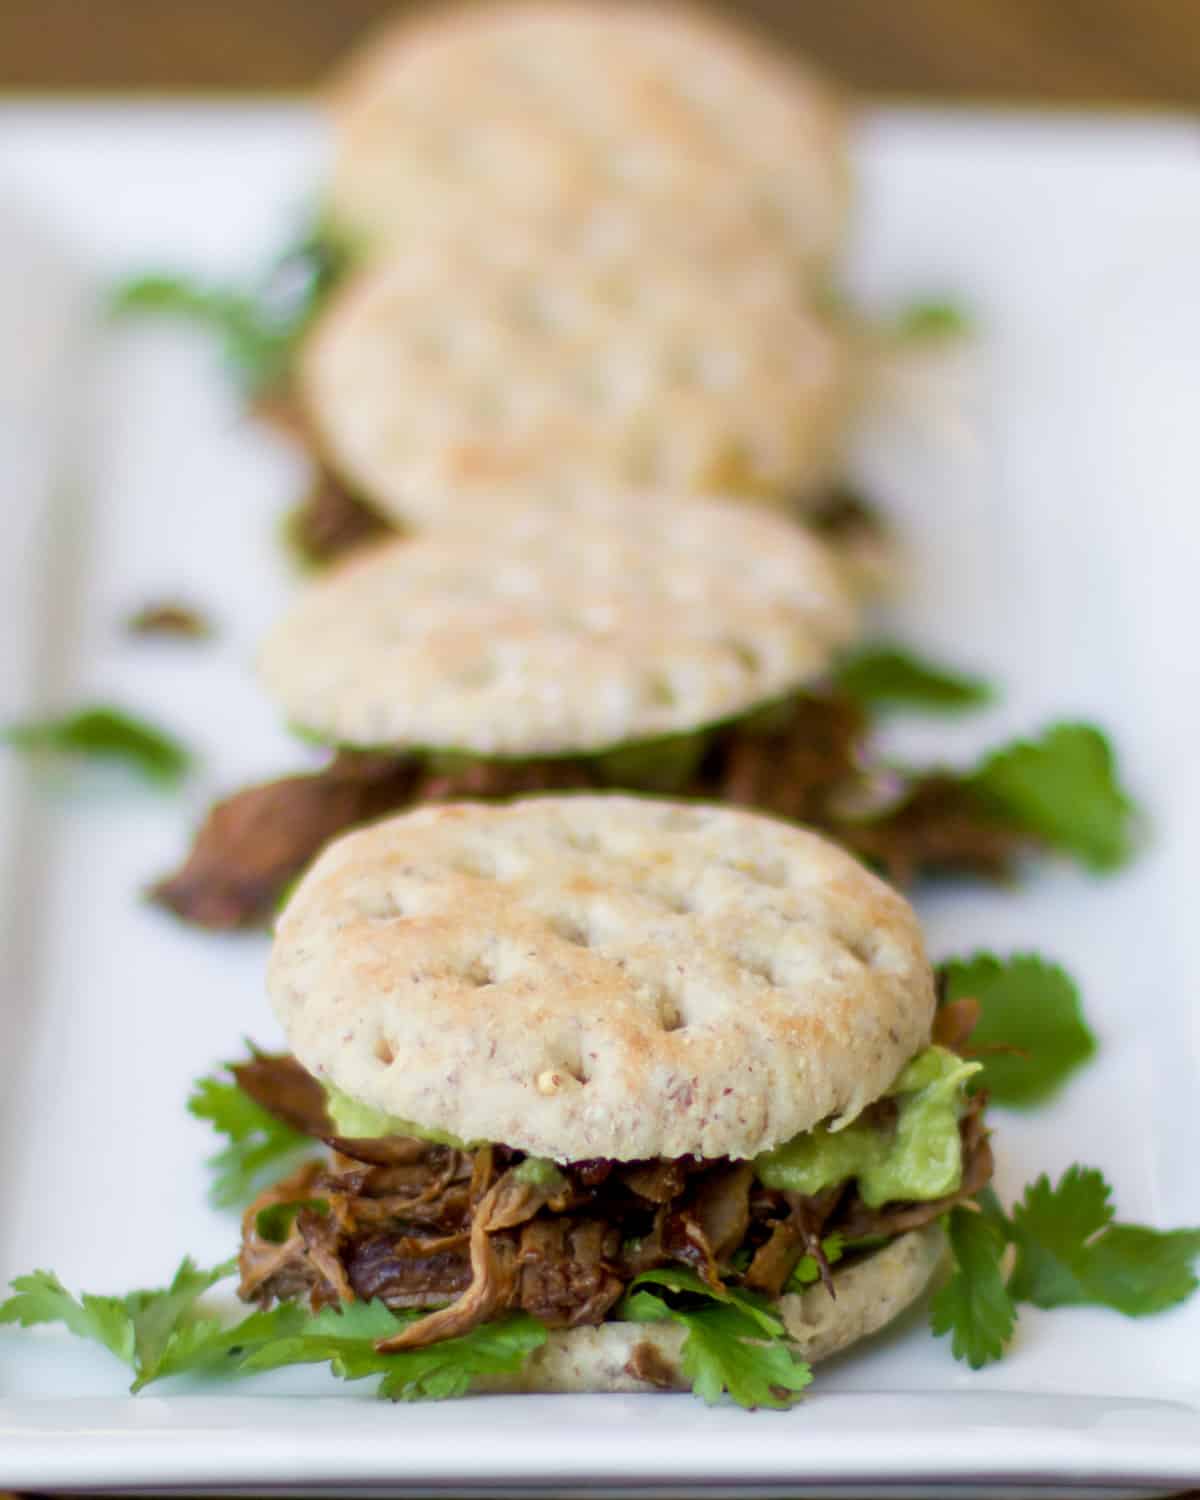 Shredded beef on mini buns on a serving plate.